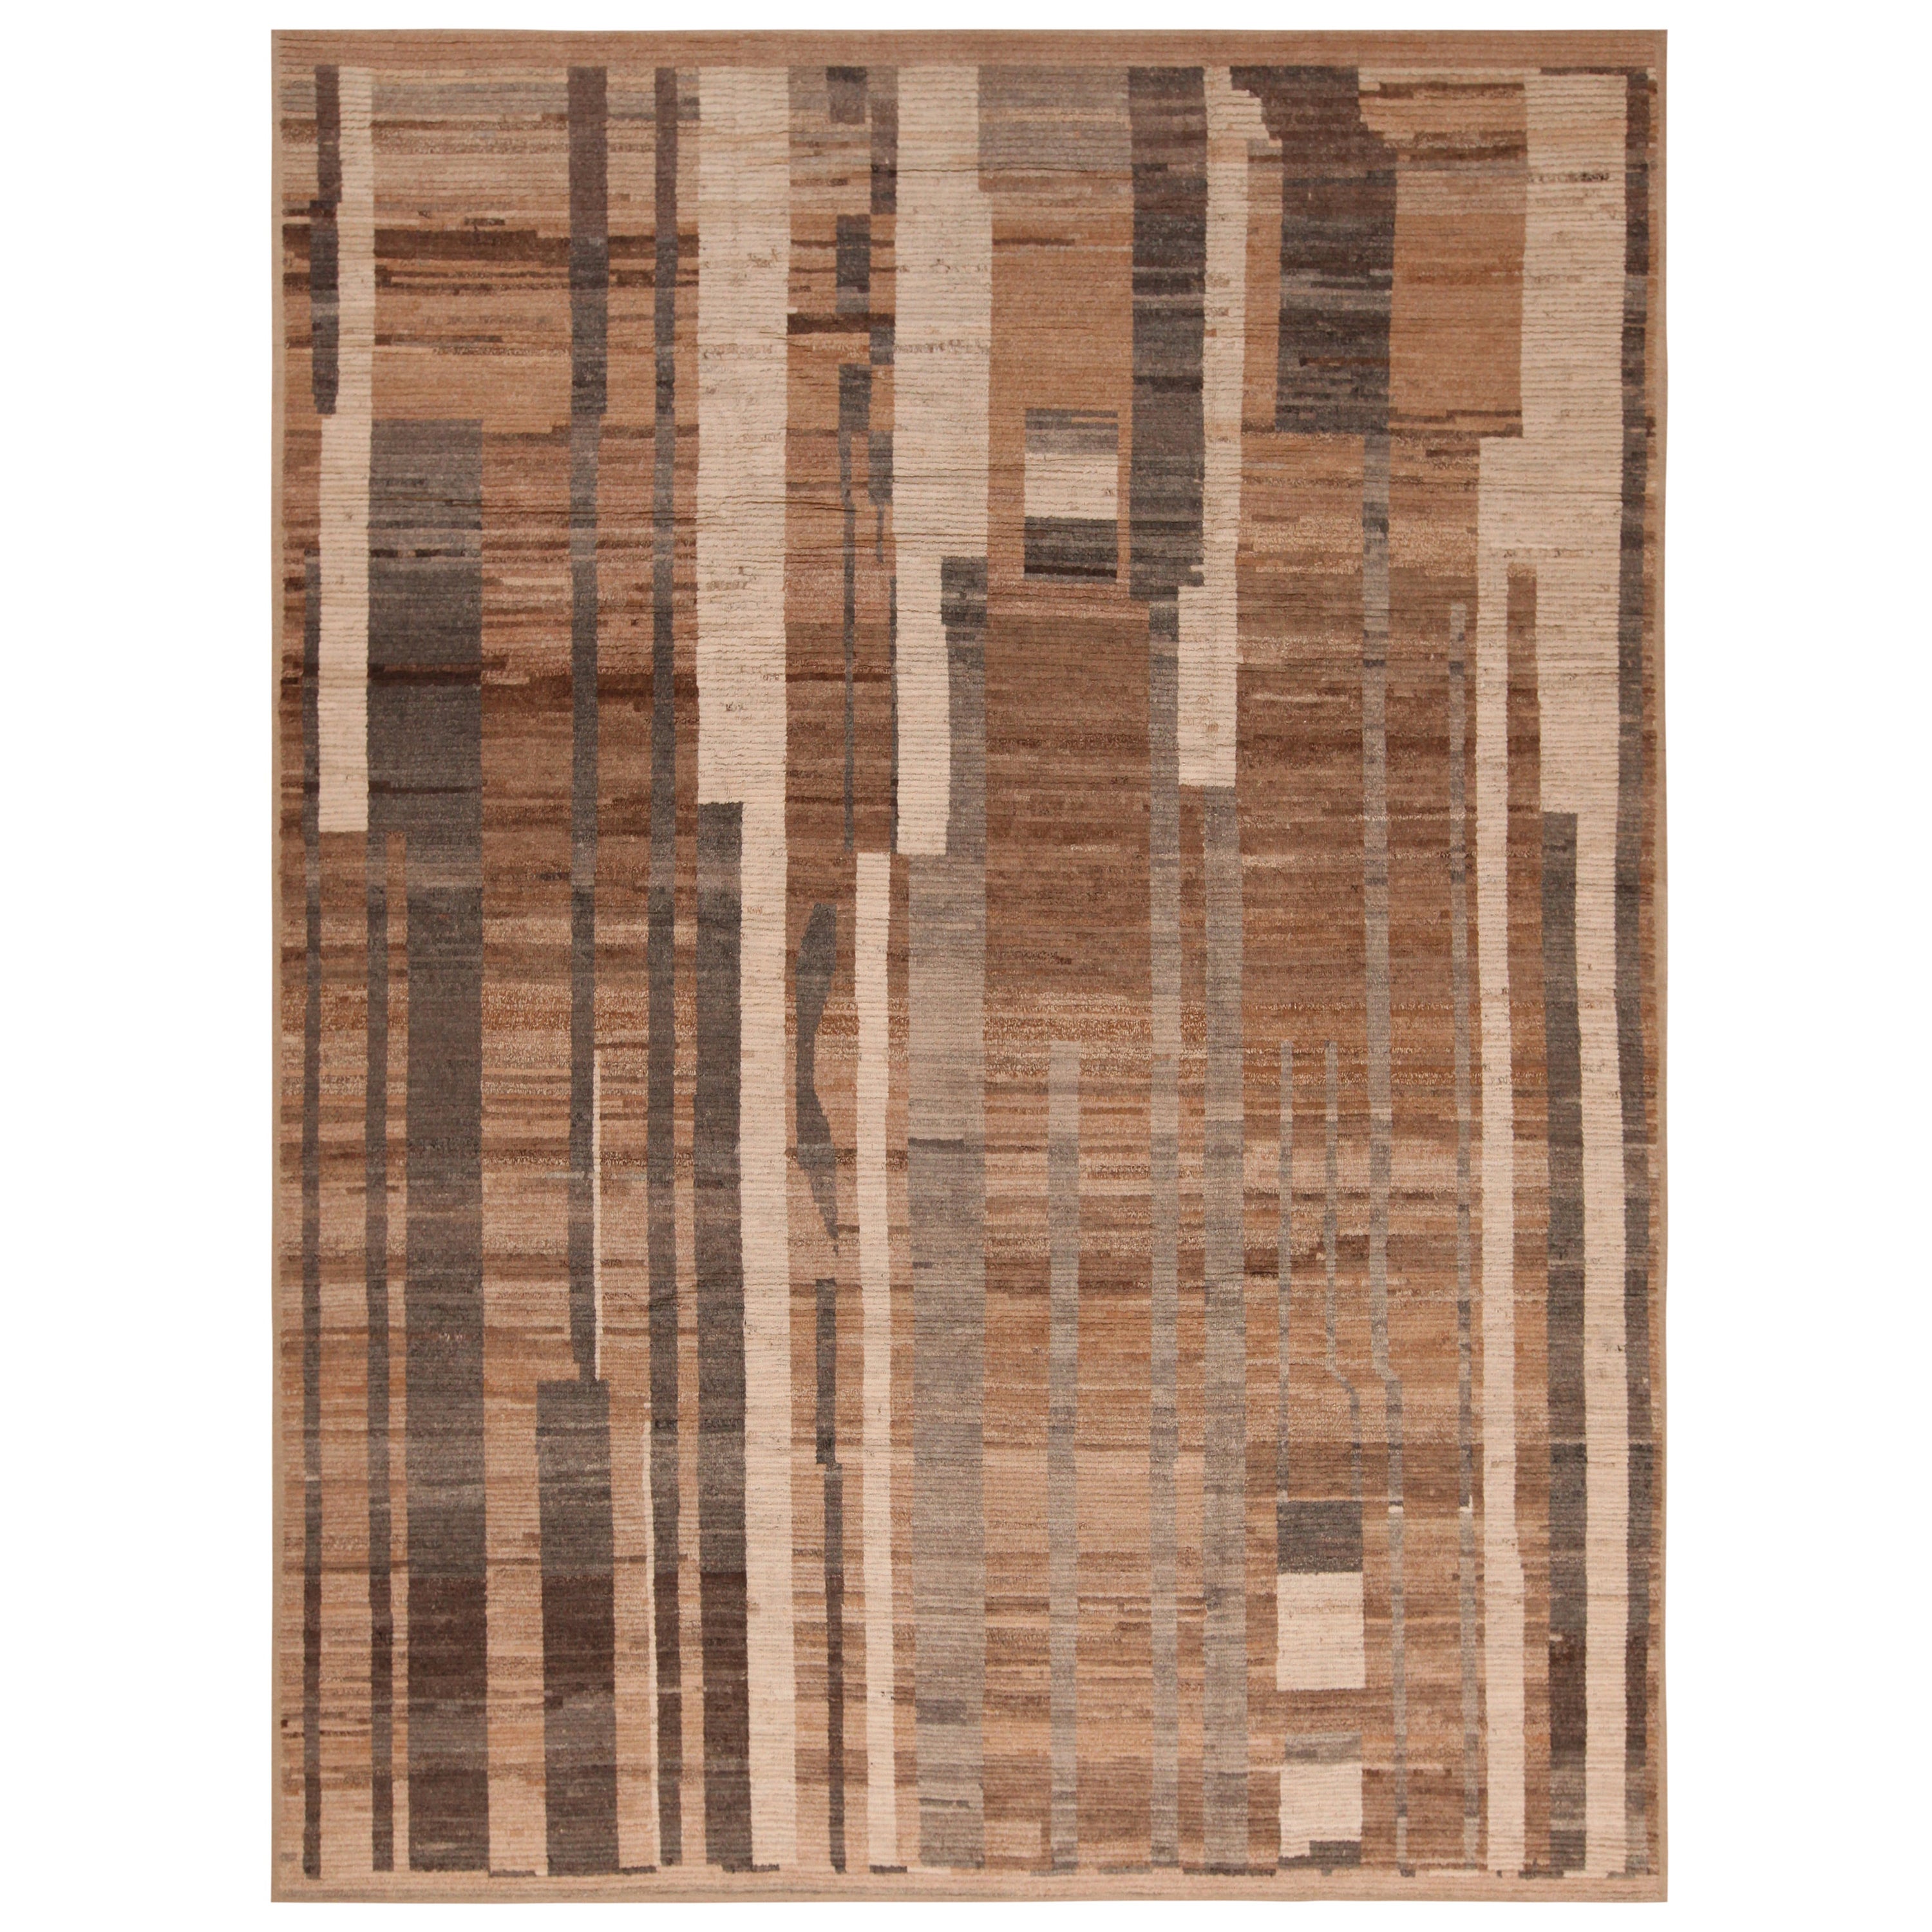 Nazmiyal Collection Nature Inspired Modern Moroccan Rug. 9 ft 1 in x 11 ft 11 in For Sale